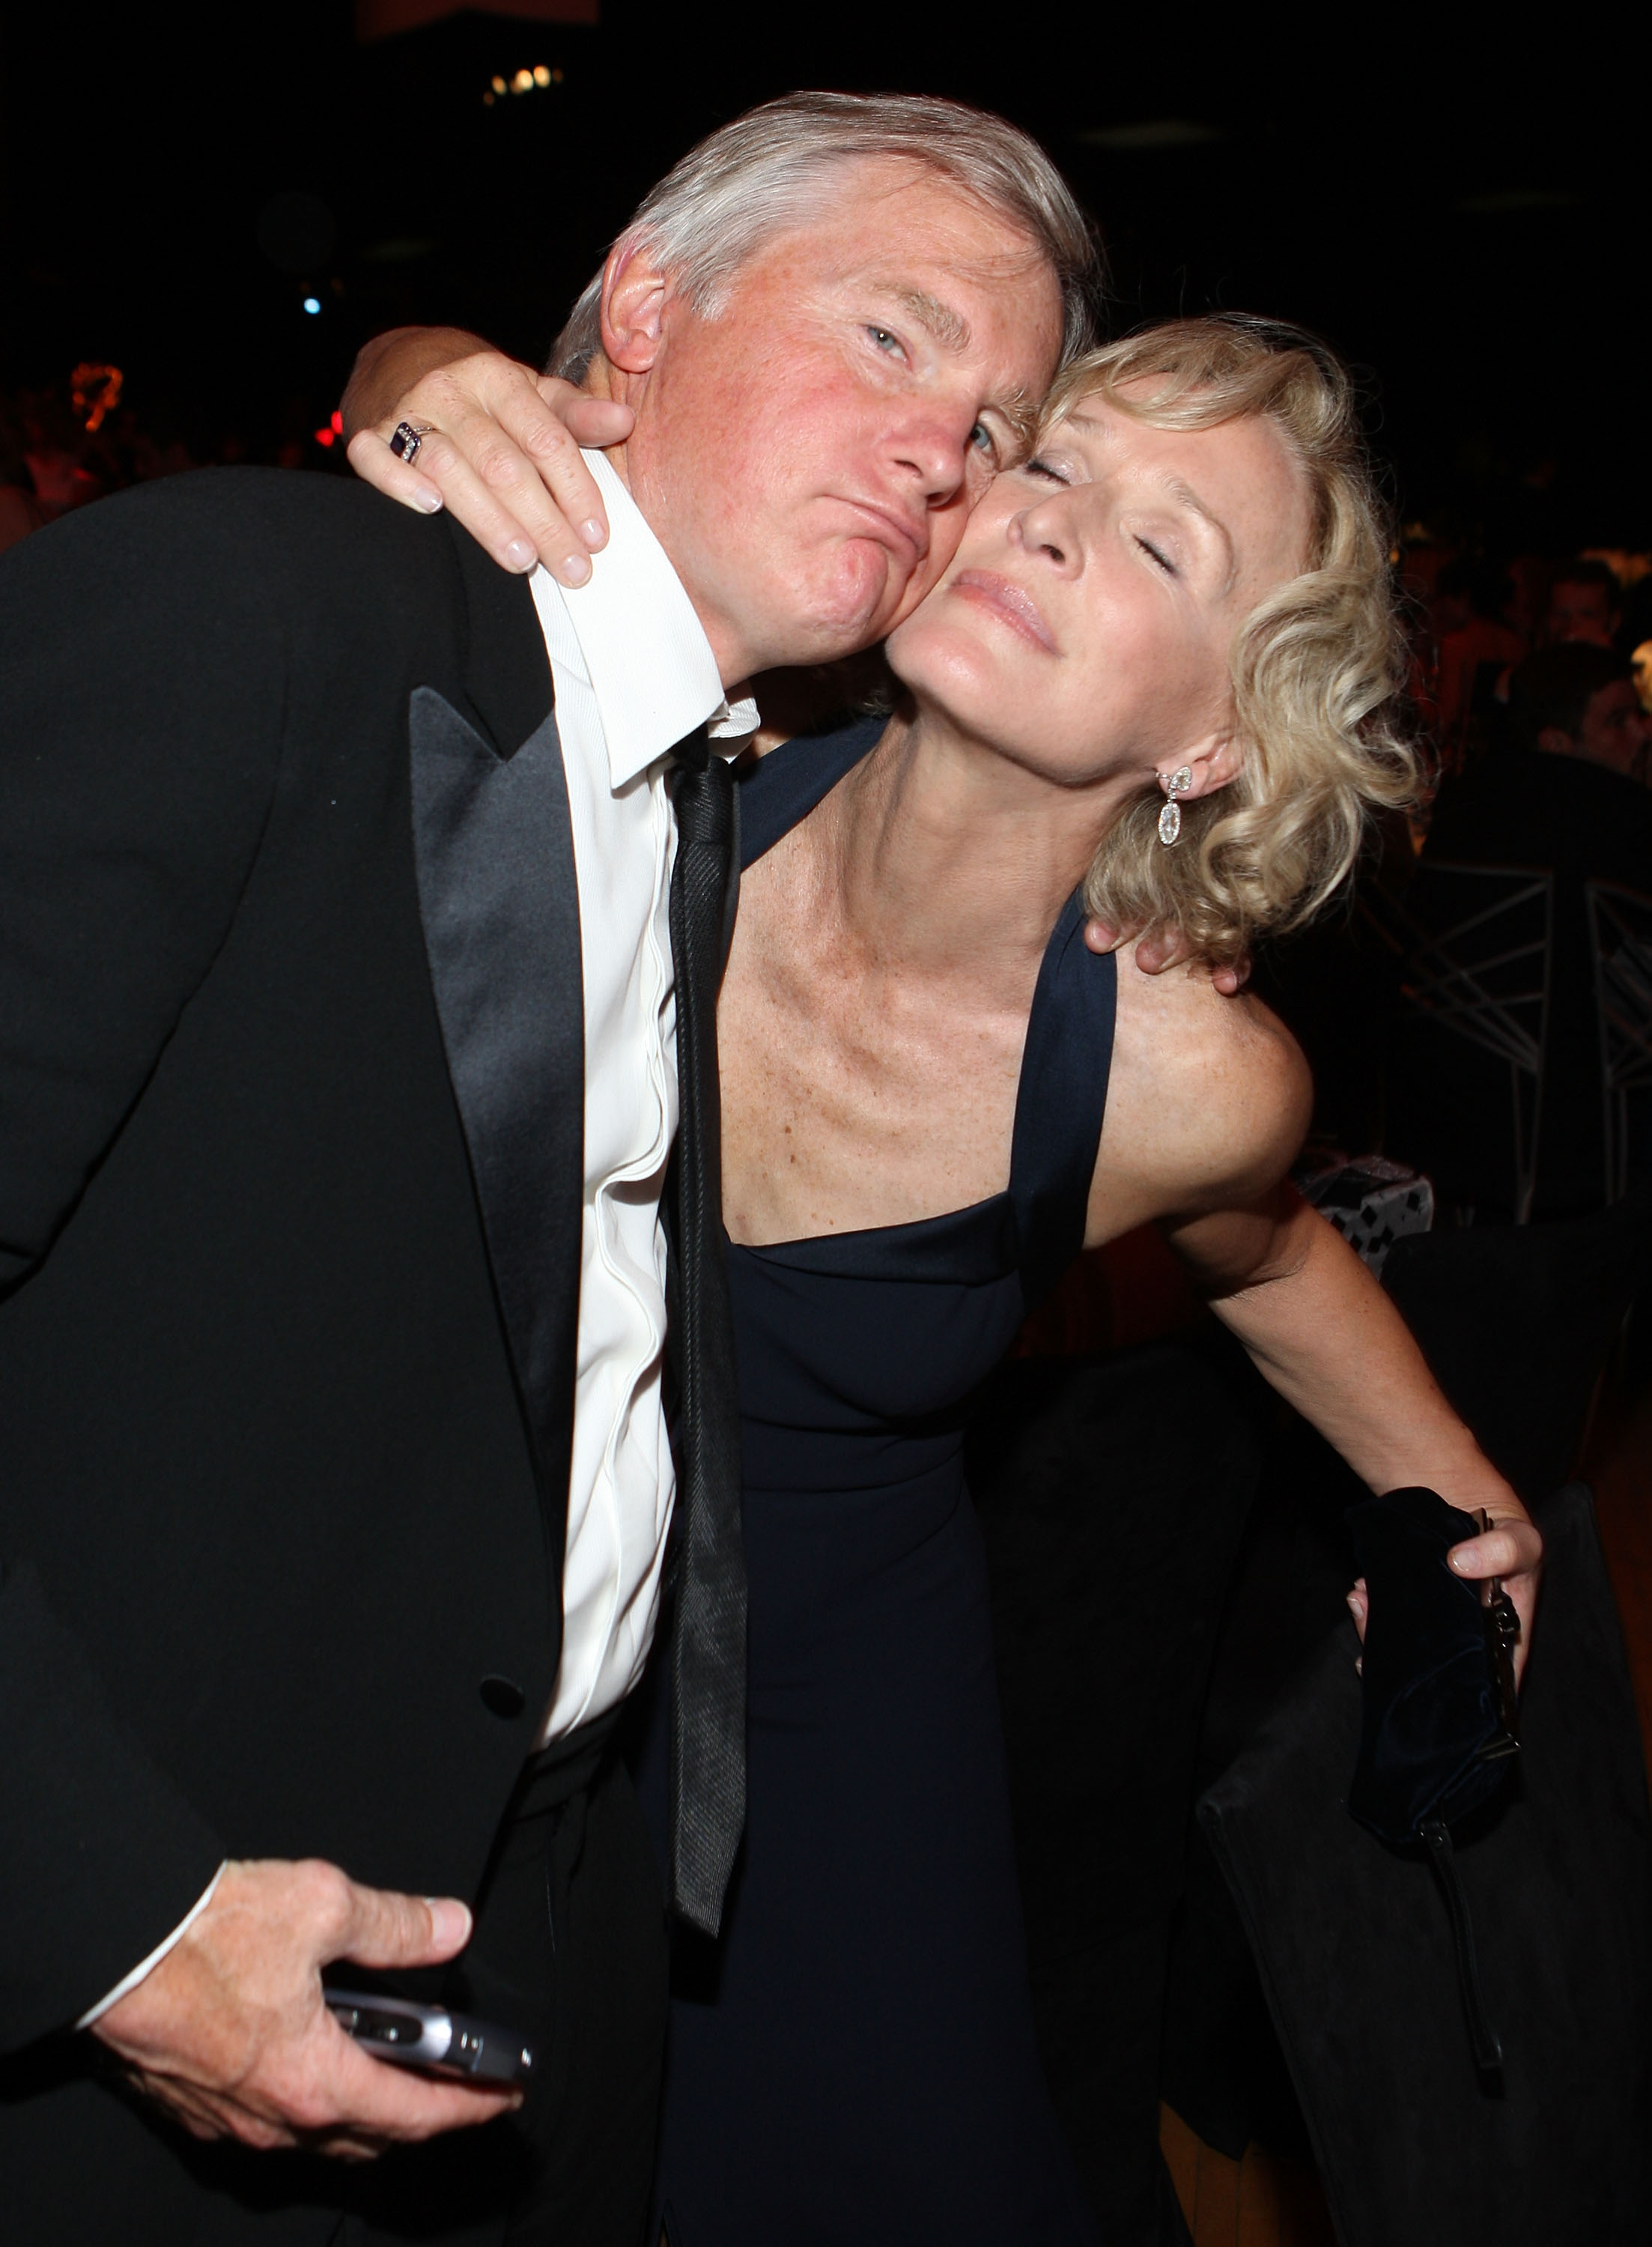 David Shaw and Glenn Close at the Governor's Ball after the 59th Annual Primetime Emmy Awards in Los Angeles, California on September 16, 2007 | Source: Getty Images